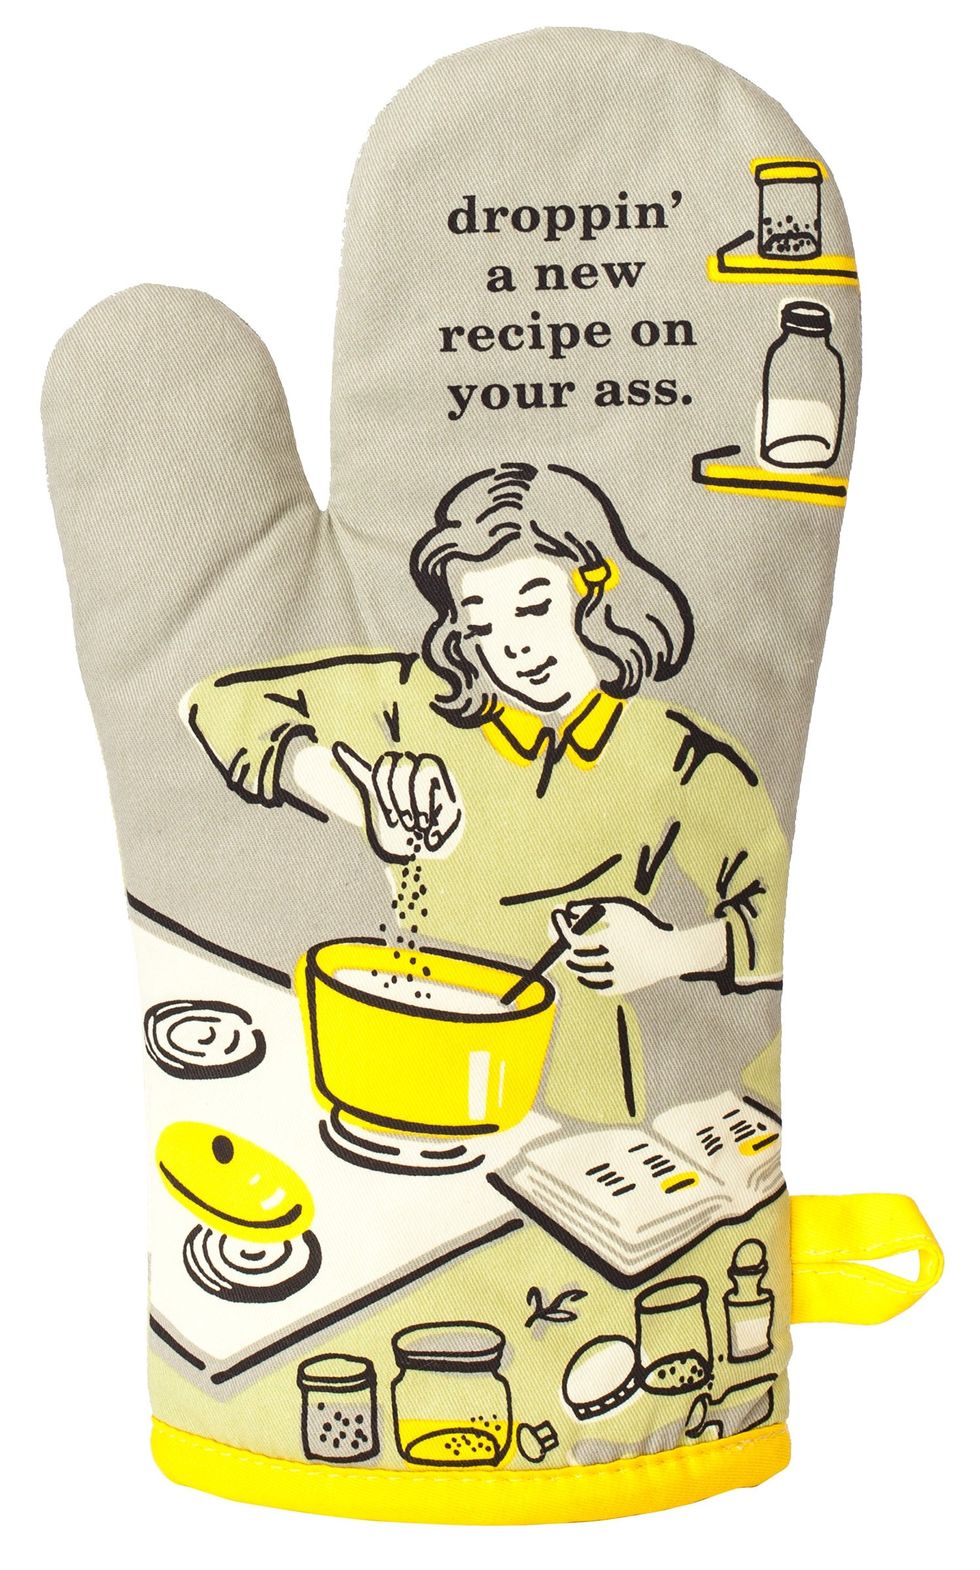 Droppin' a New Recipe on Your A** Oven Mitt